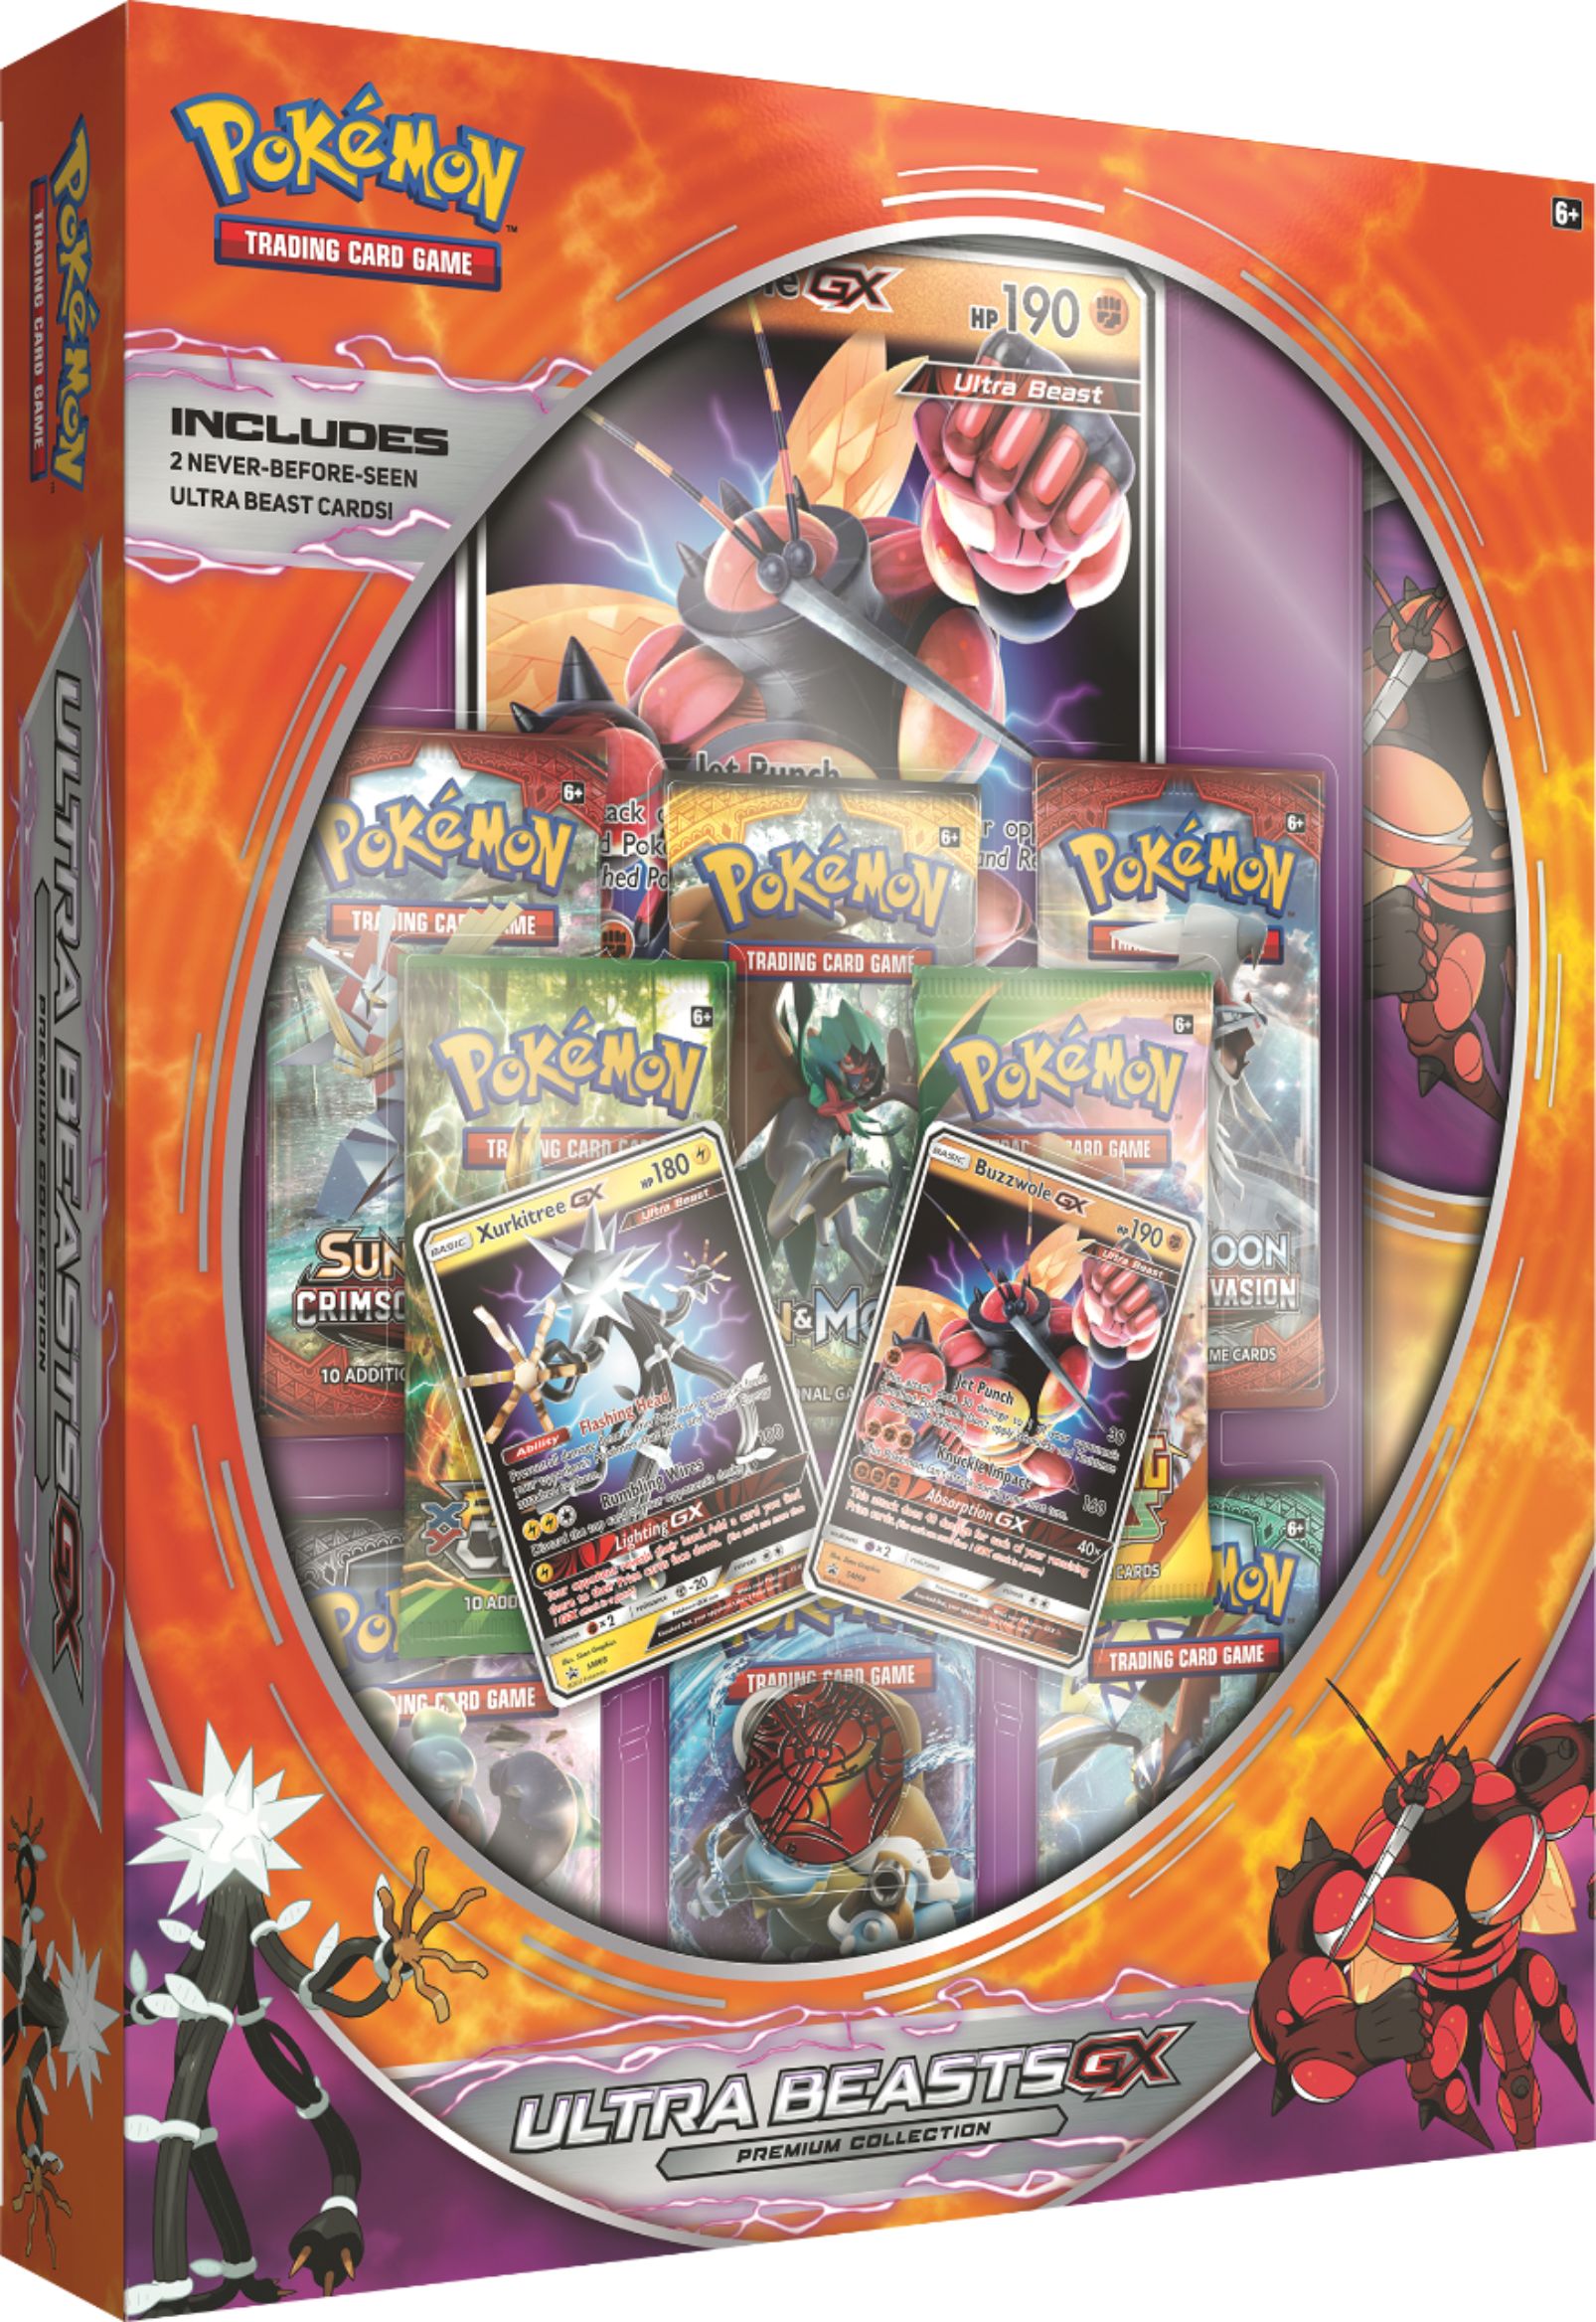 Pokemon Ultra Beasts Gx Premium Collection Styles May Vary Best Buy